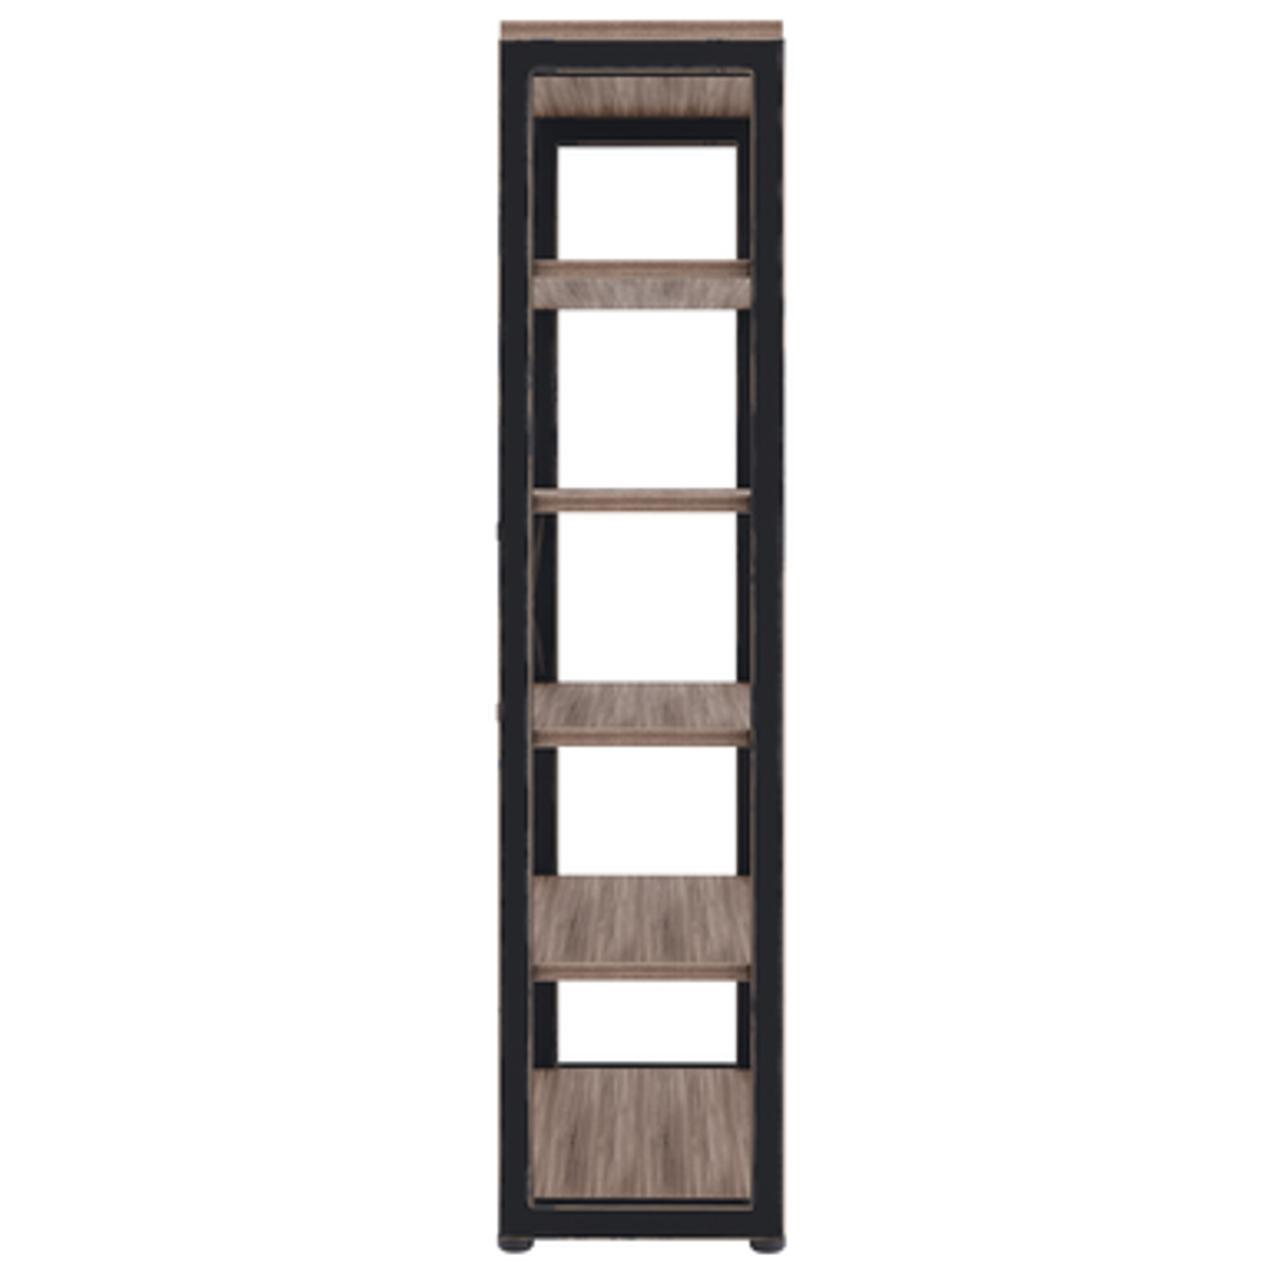  Office Source Riveted Collection 6 Shelf Bookcase HIB3566 